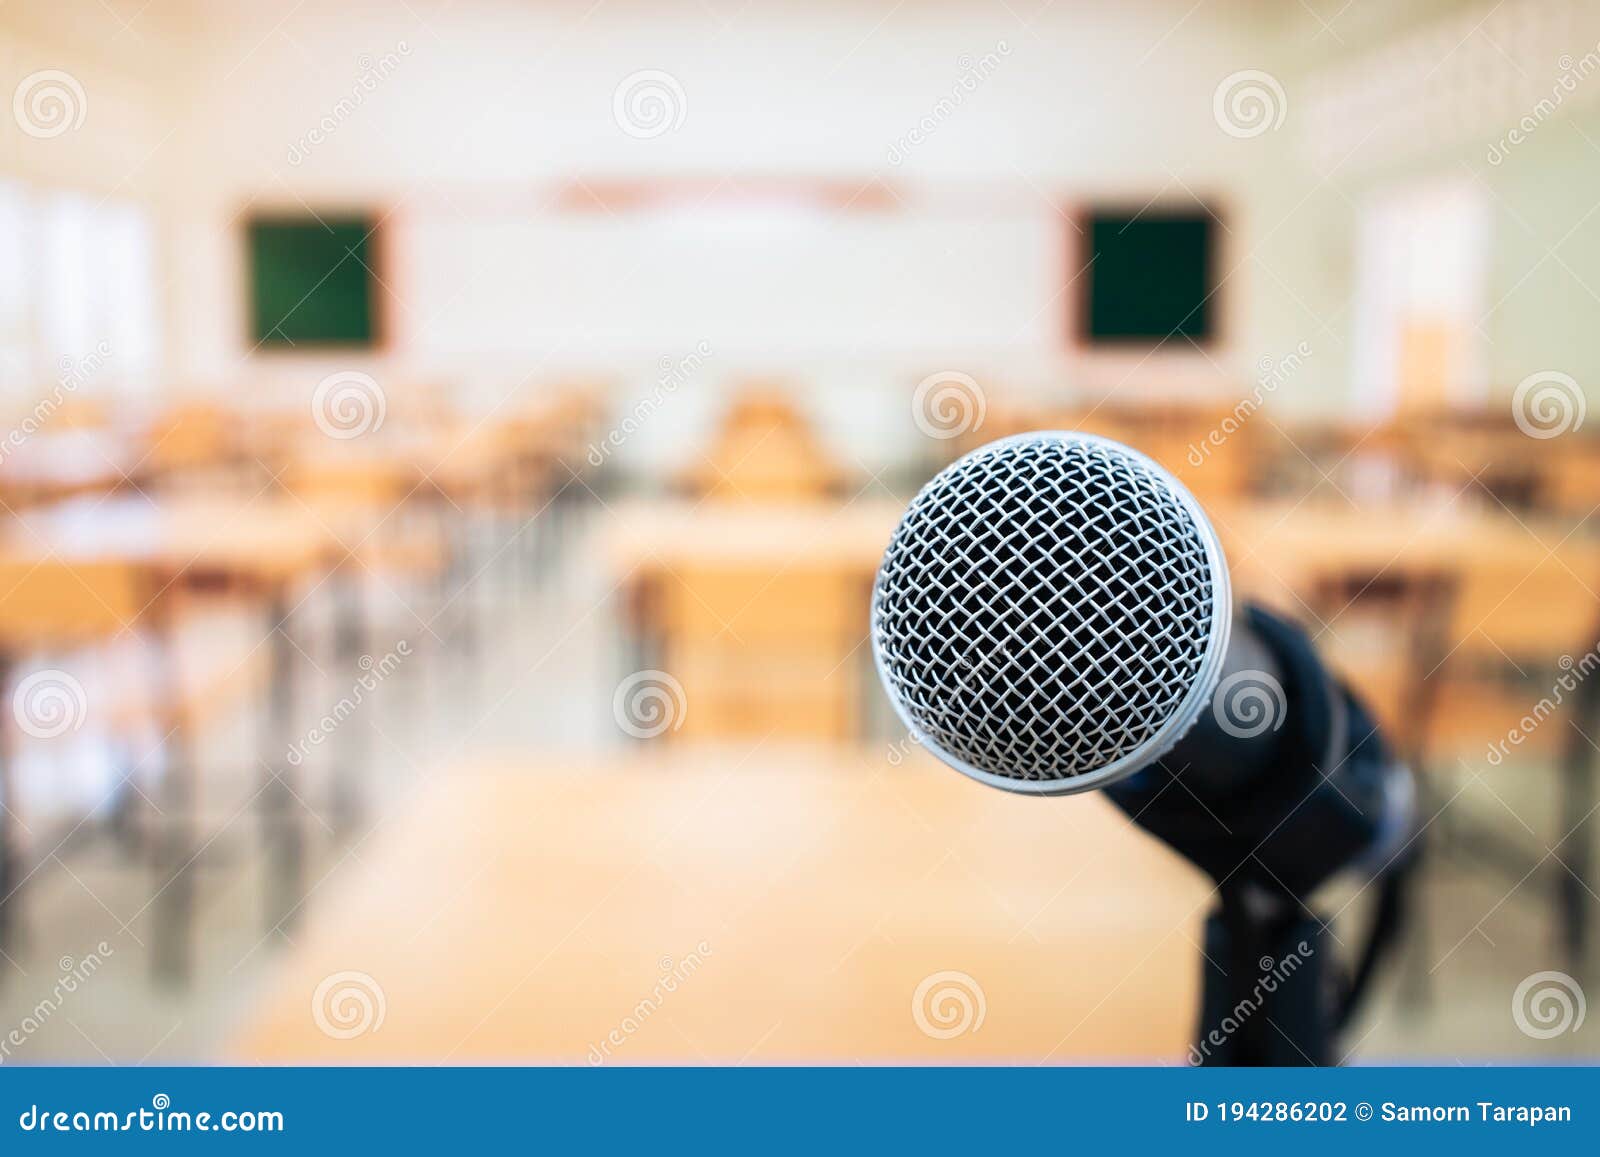 microphones on voice speaker in classroom at university lecture hall, concept of speech and teaching with microphone keynote at